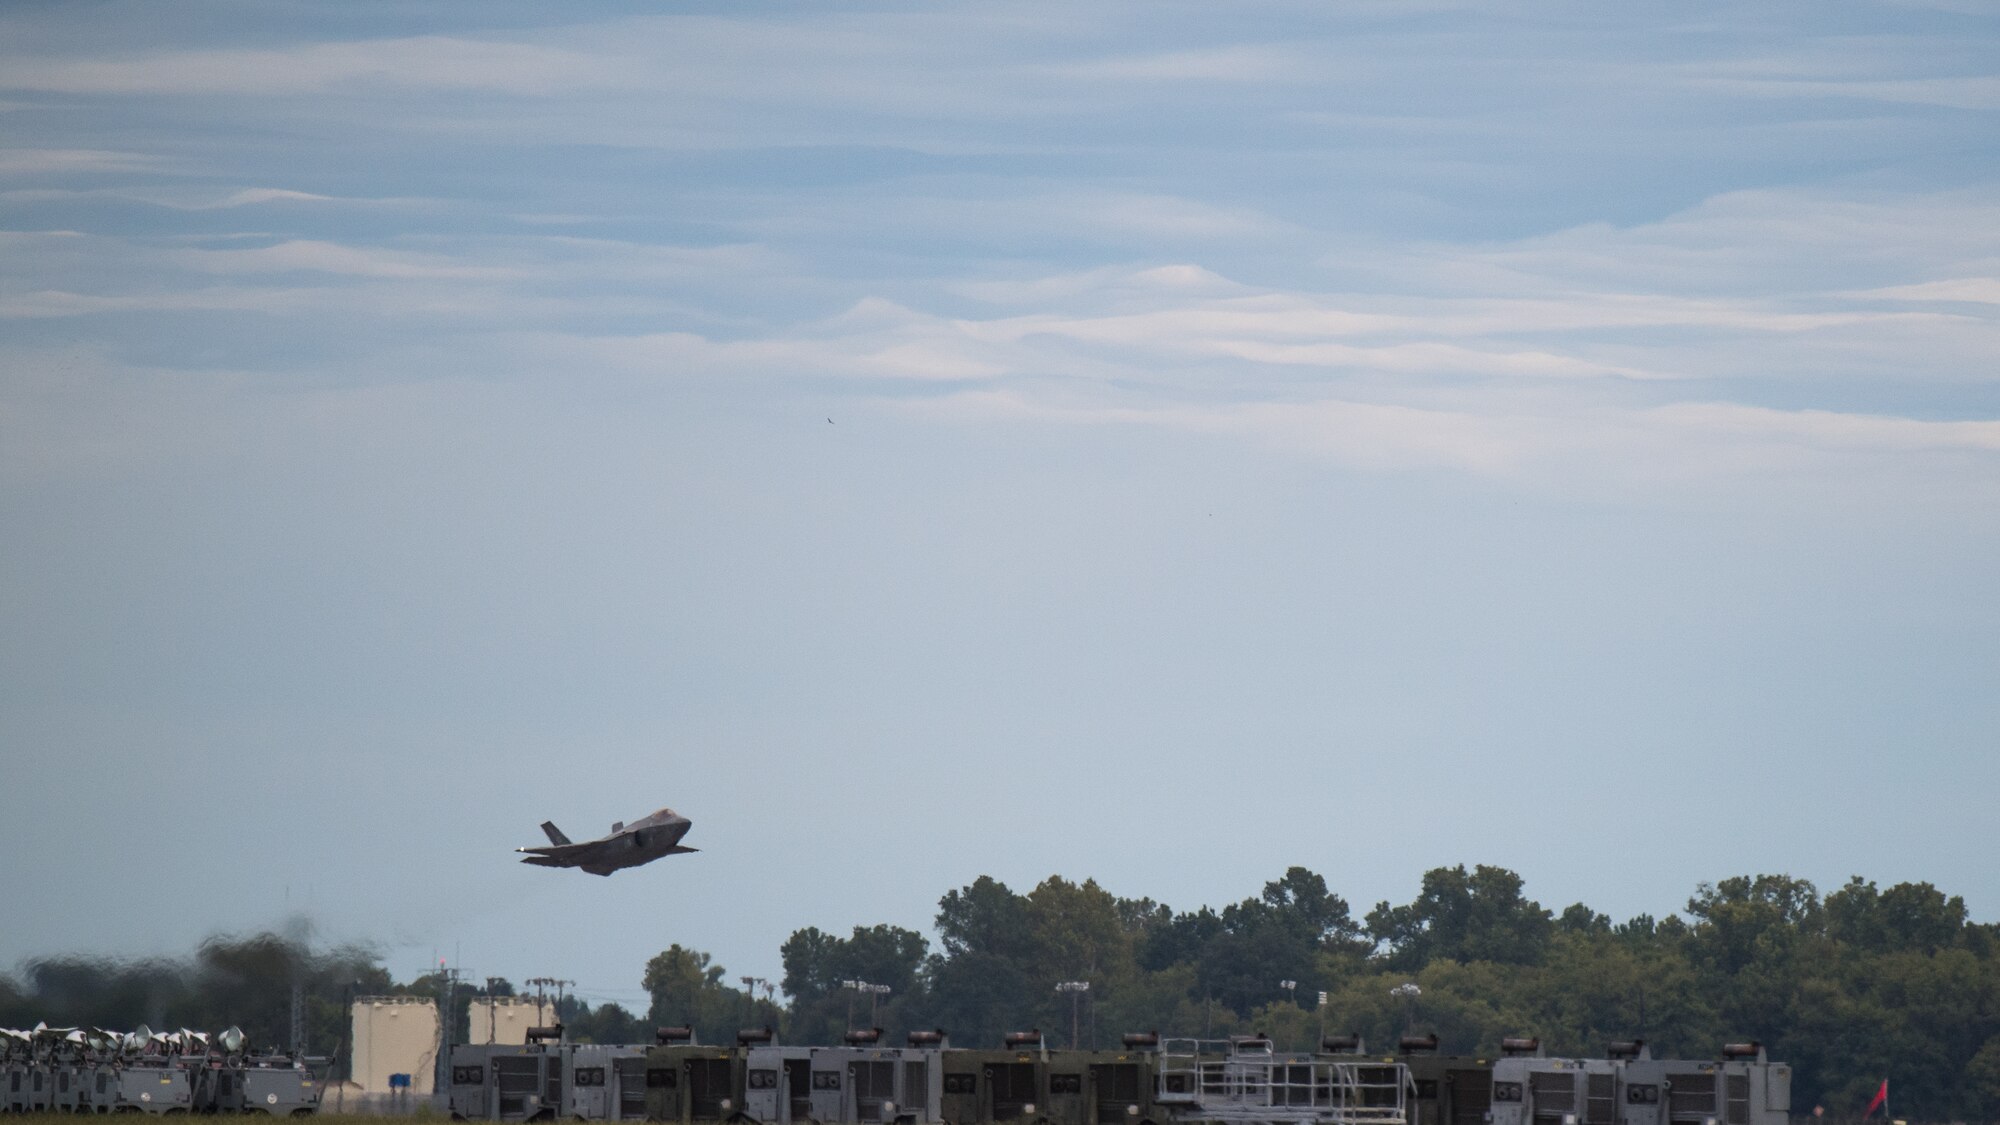 An F-35 Lightning from Eglin Air Force Base, Fla., takes flight at Barksdale Air Force Base, La., Oct. 12, 2018. The aircraft evacuated to Barksdale to avoid possible damage from Hurricane Michael. (U.S. Air Force photo by Airman 1st Class Lillian Miller)